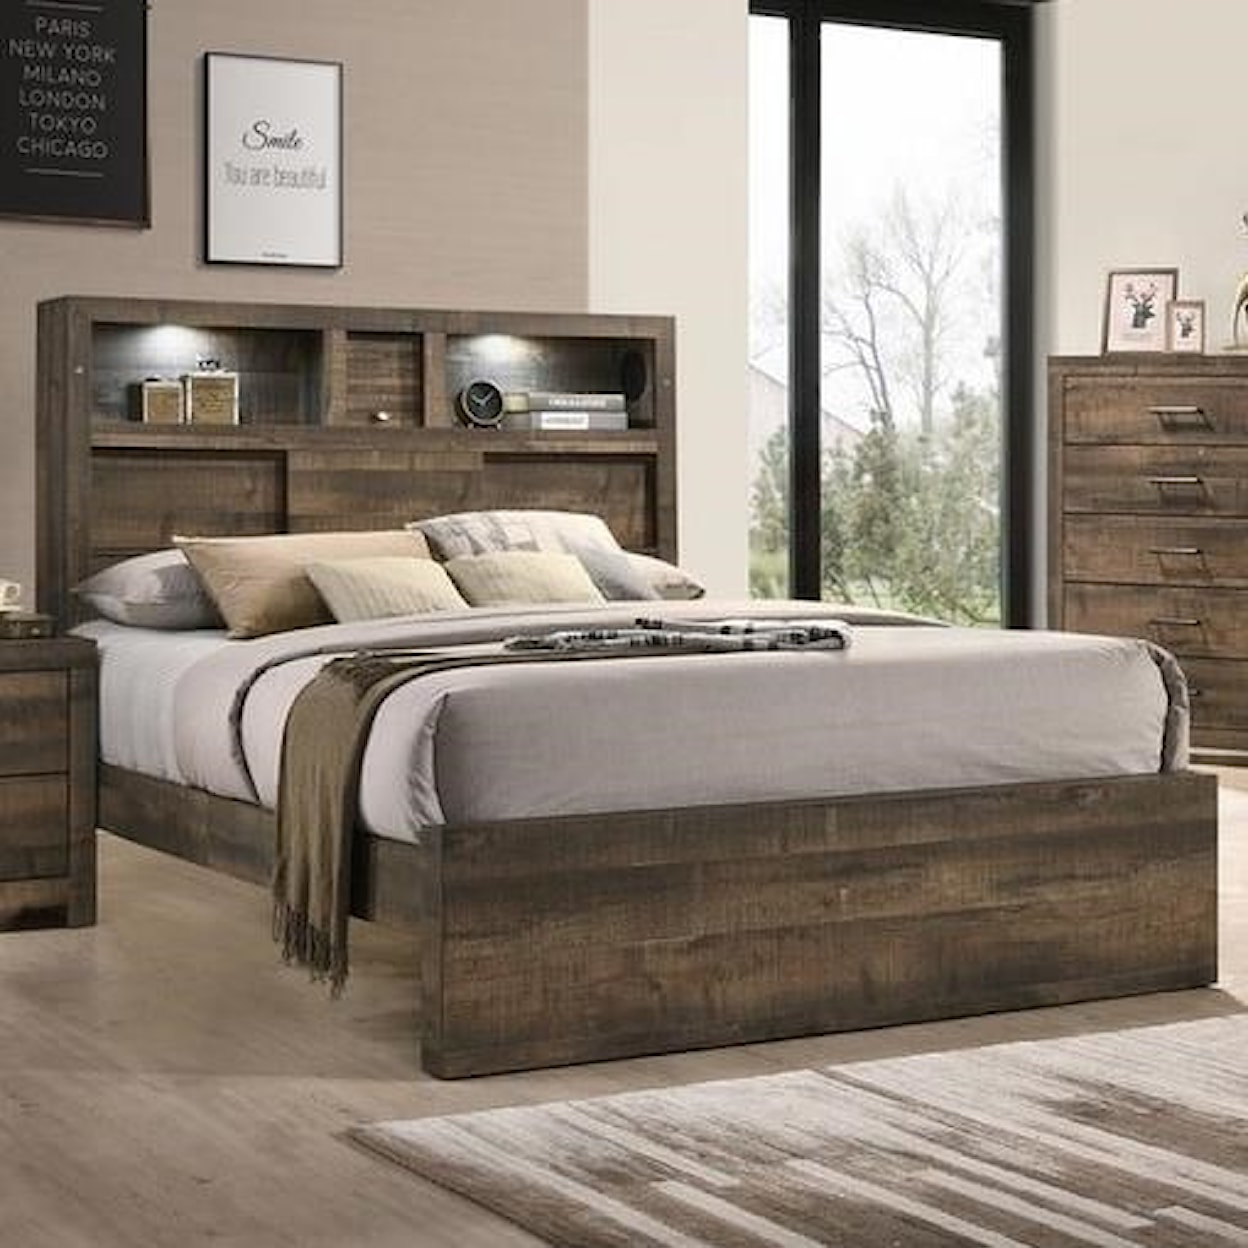 Elements International Bailey Music King Bookcase Bed